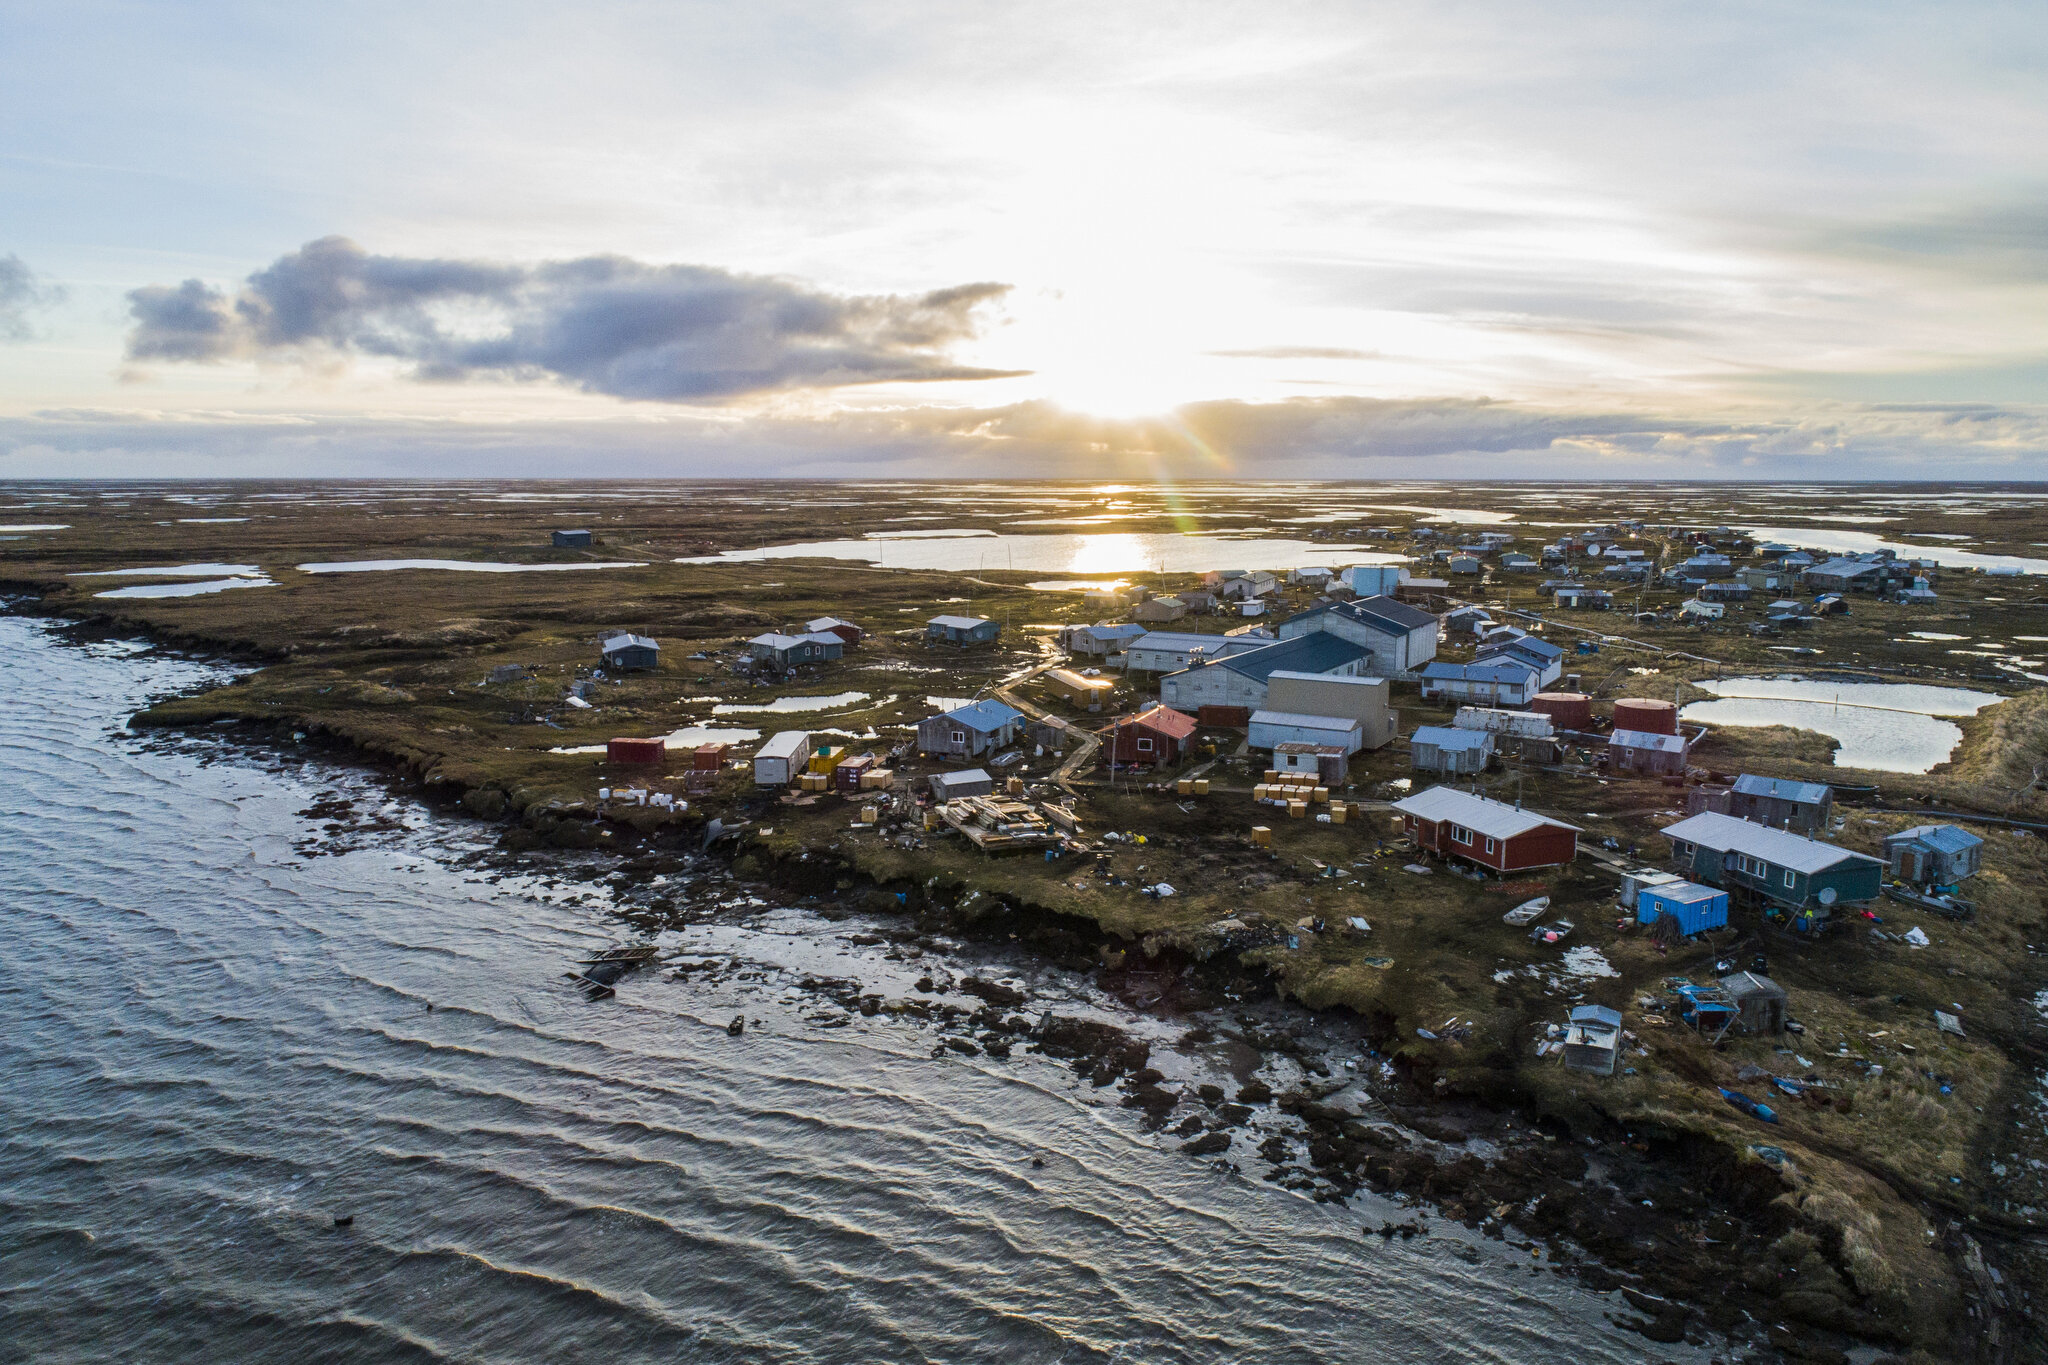  The Yupik village of Newtok in western Alaska, population 380, flanked by the Ninglik and Newtok Rivers. May 25th, 2019. The village is sinking as the permafrost beneath it thaws. Erosion has already wiped out nearly a mile of NewtokÕs land, and it 